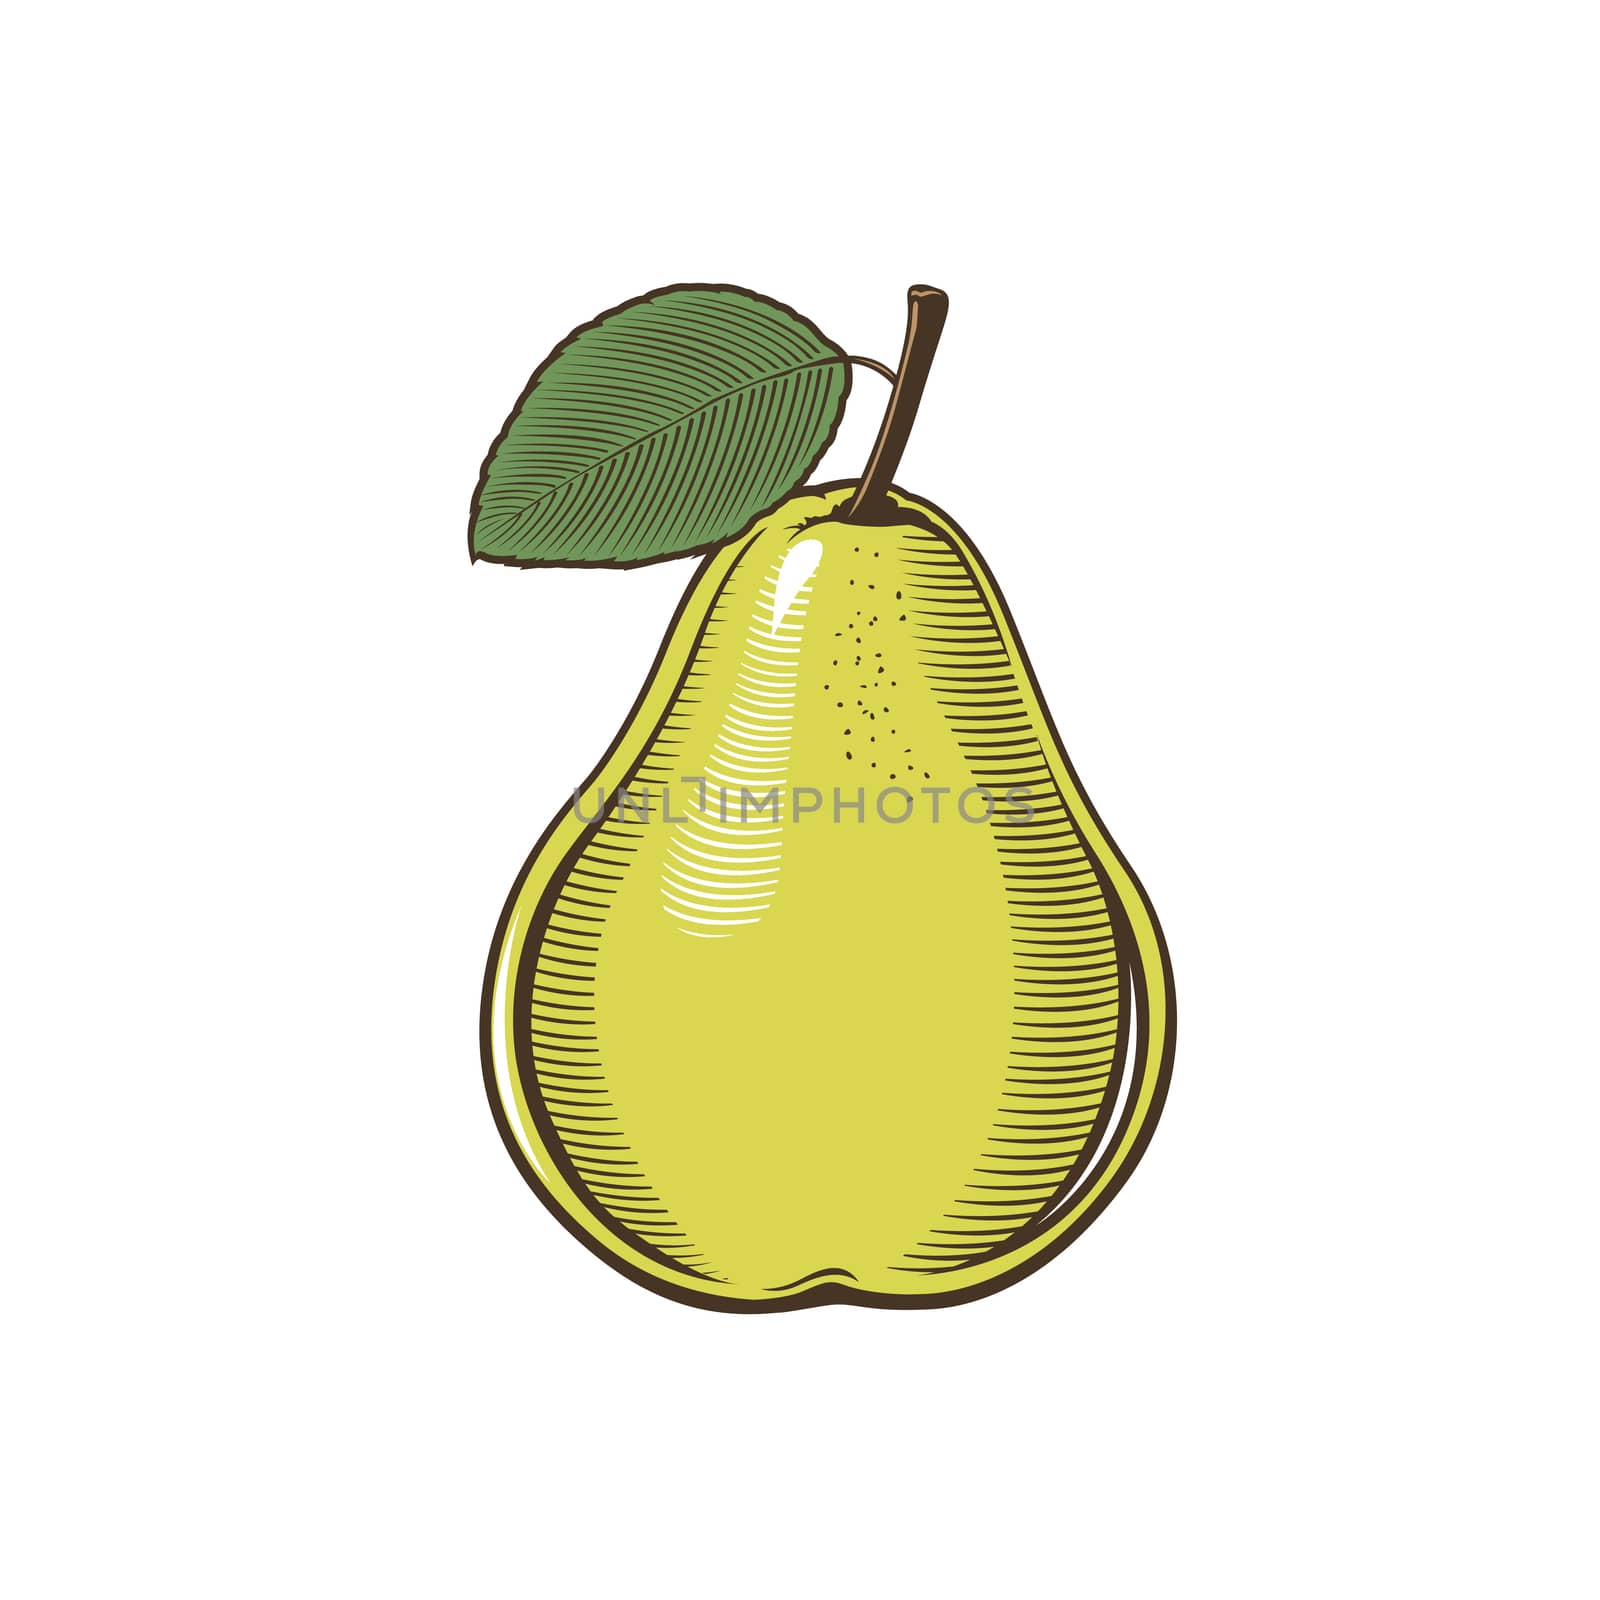 Pear in vintage style by ConceptCafe